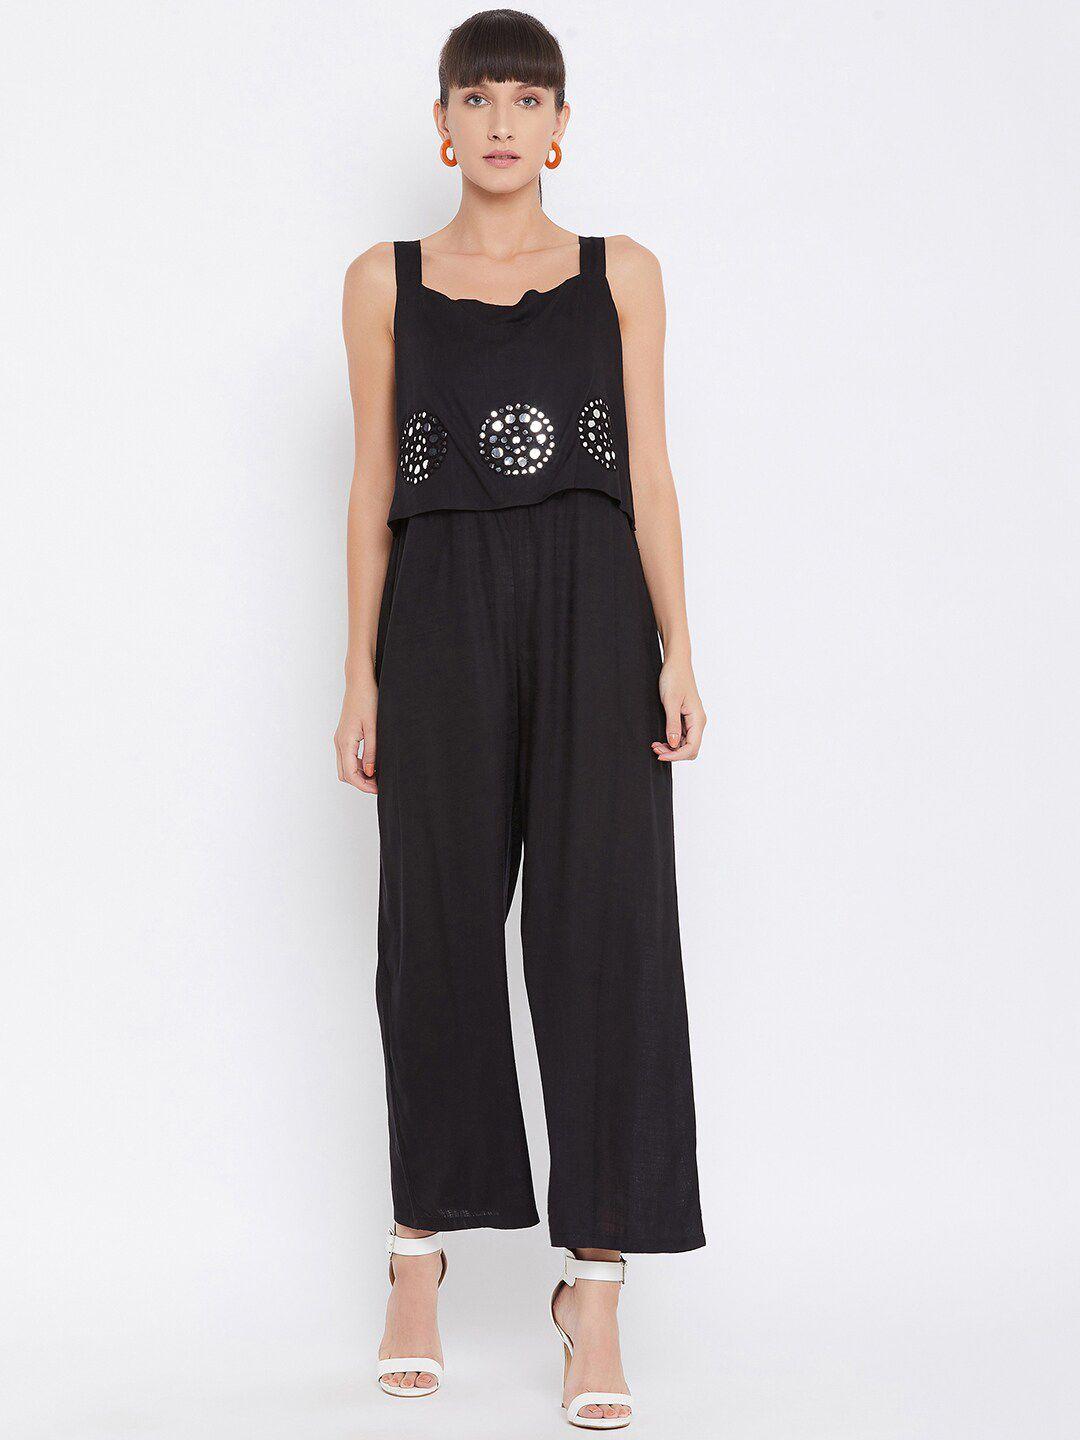 baesd black basic jumpsuit with embroidered